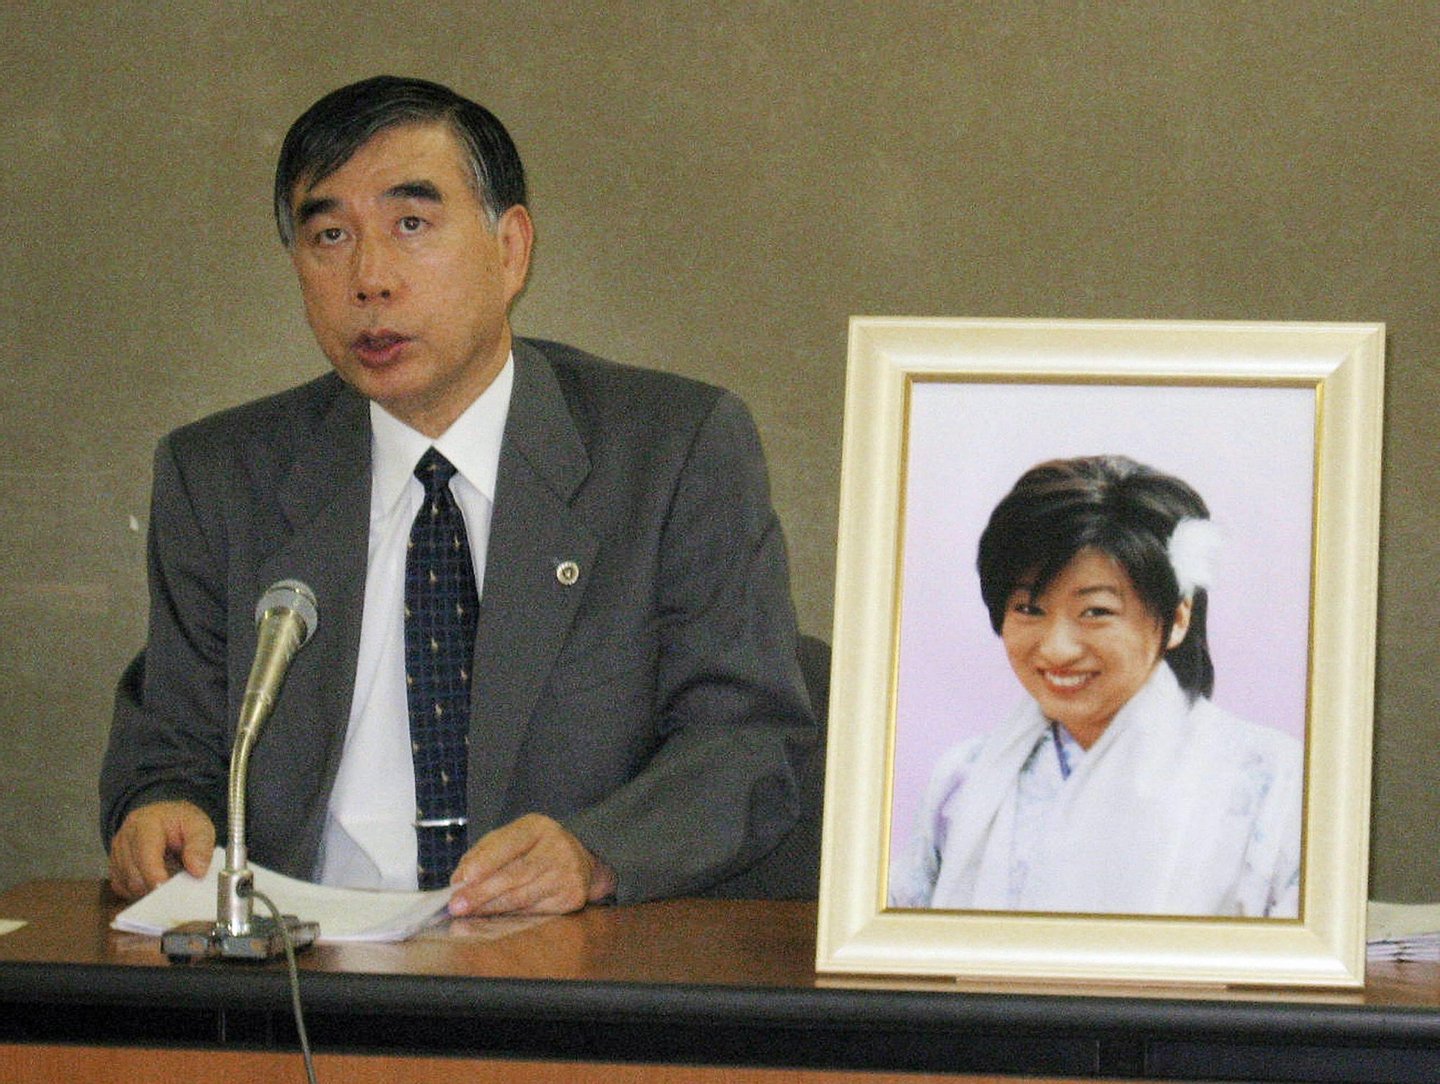 TO GO WITH STORY "FINANCE-ECONOMY-JAPAN-HEALTH-PSYCHOLOGY" by PATRICE NOVOTNY Japanese lawyer Hiroshi Kawahito speaks at a press conference in Tokyo on October 17, 2008, while a portrait of Japanese nurse Ai Takahashi, a victim of "karoshi" or death by overwork is displayed. Pushed to their limits, thousands of Japanese are literally working themselves to death each year, a scourge the Asian power has started to address but is seen getting worse in the global economic crisis. AFP PHOTO / JIJI PRESS (Photo credit should read STR/AFP/Getty Images)